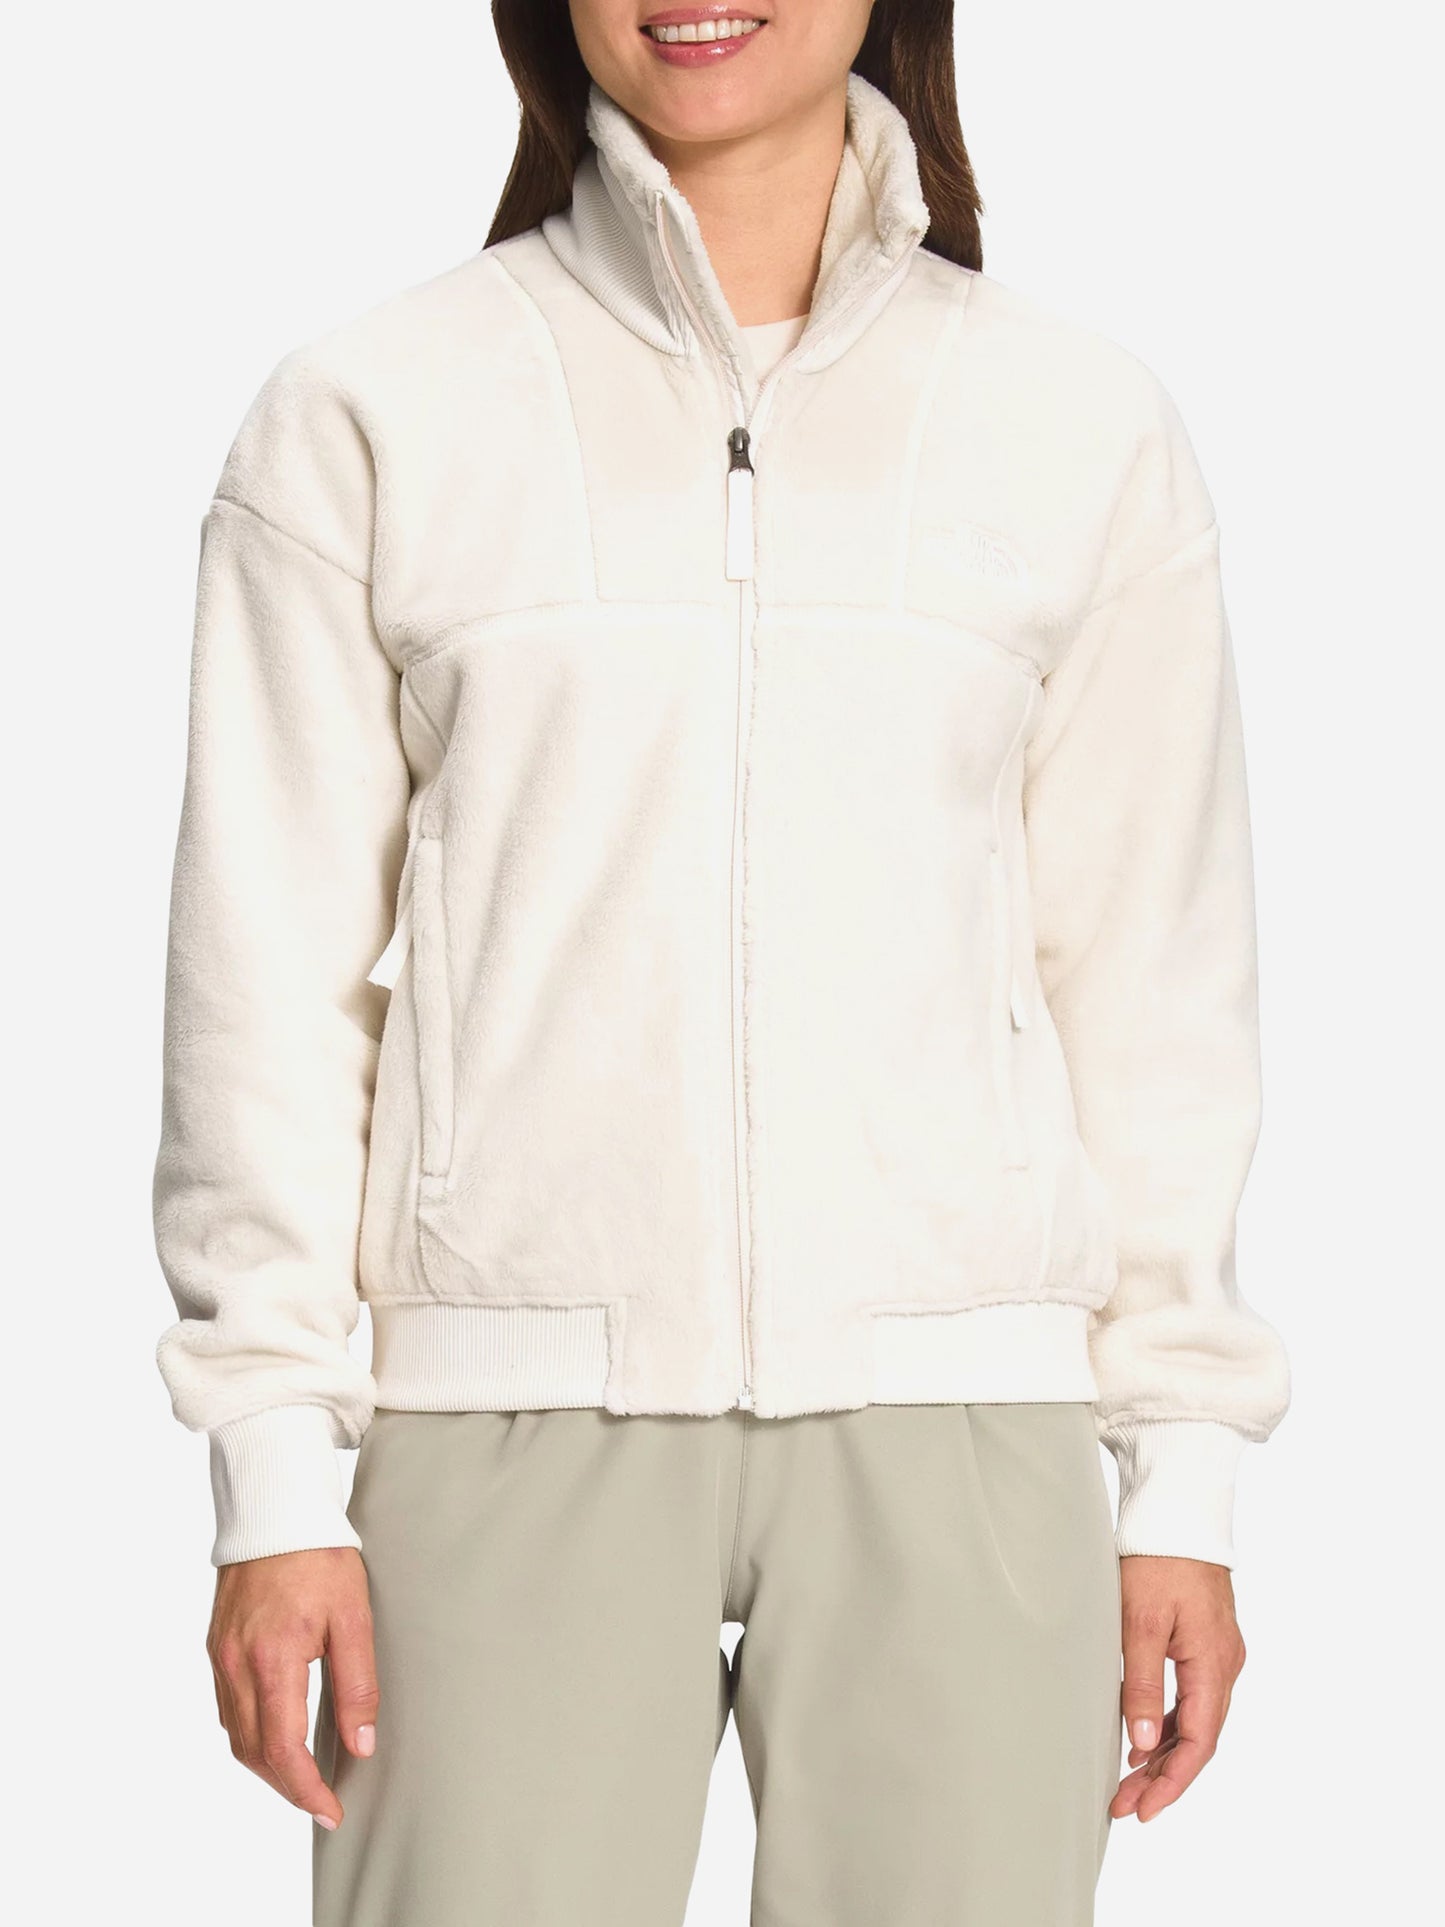 The North Face Women's Luxe Osito Full Zip Jacket